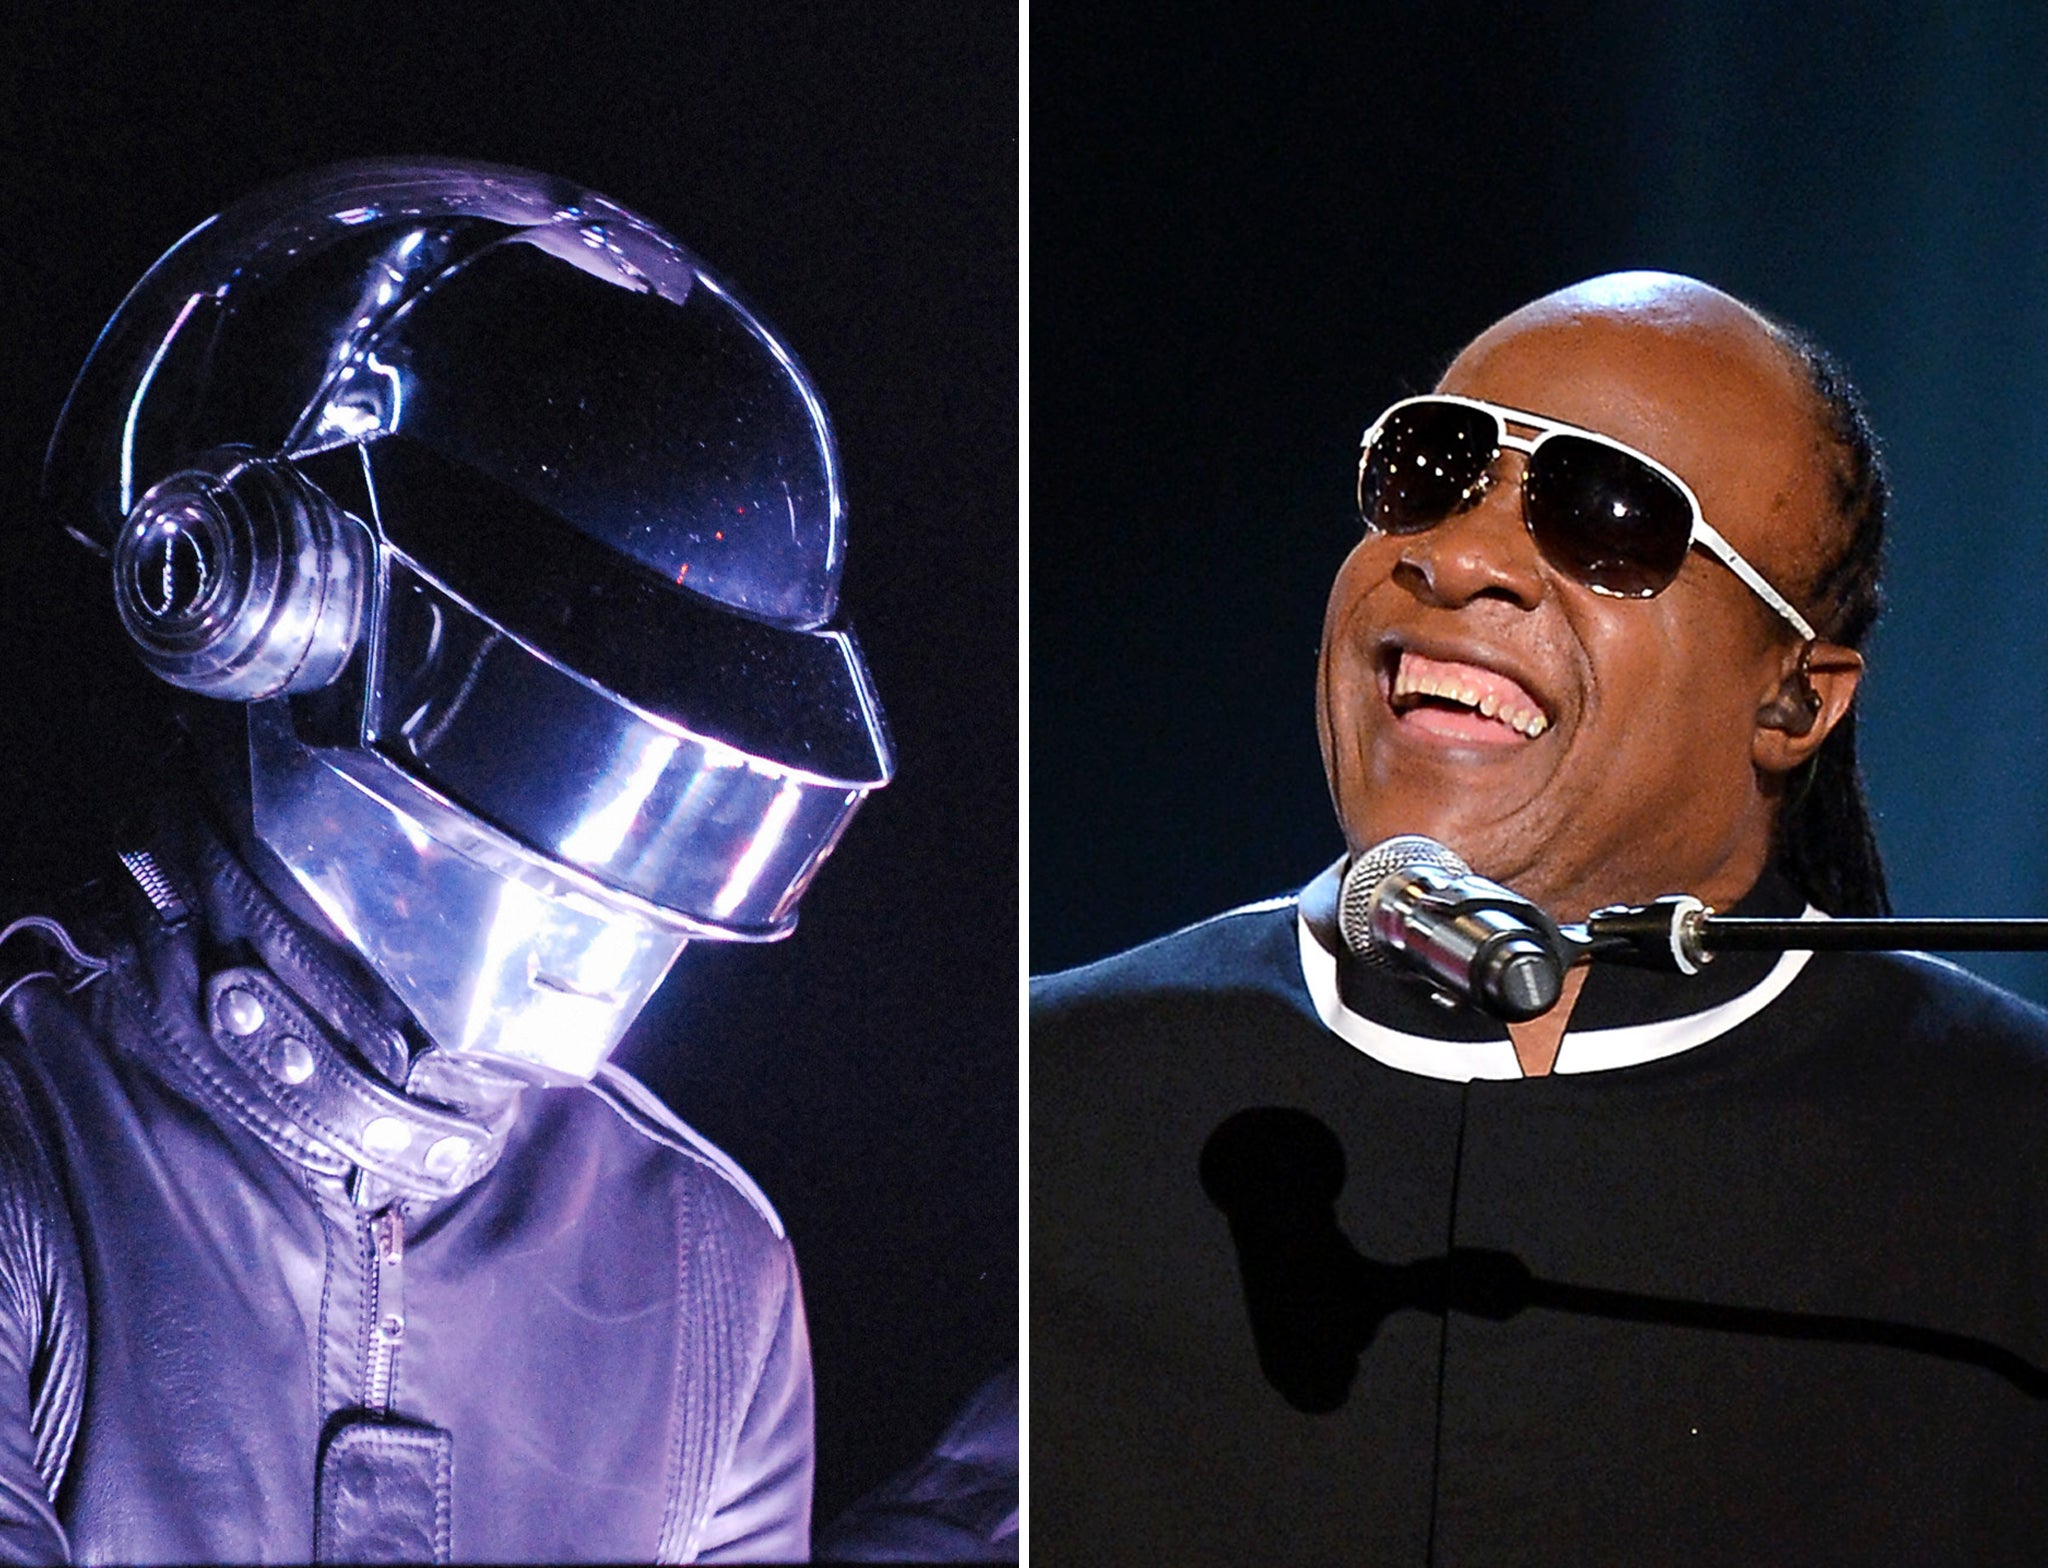 Daft Punk and Steve Wonder are collaborating for a performance at the Grammy Awards on 26 January